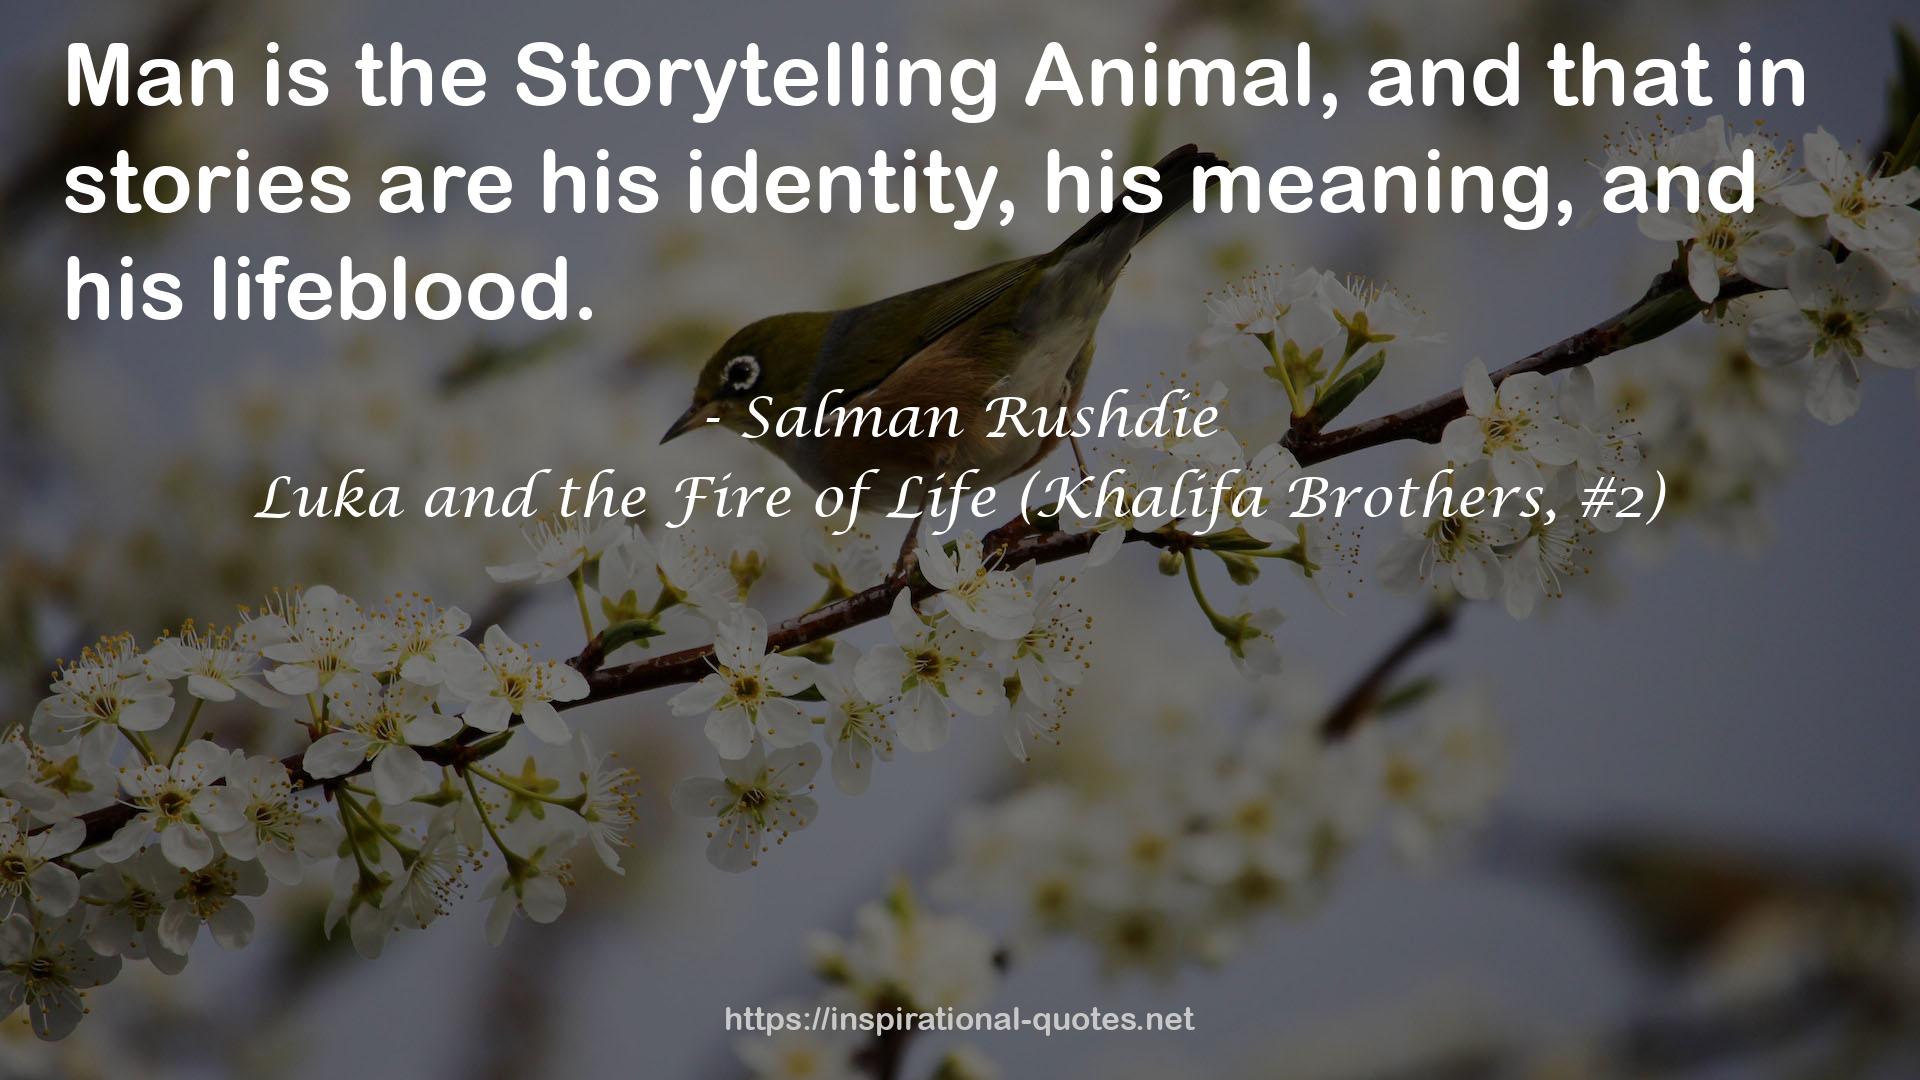 Luka and the Fire of Life (Khalifa Brothers, #2) QUOTES